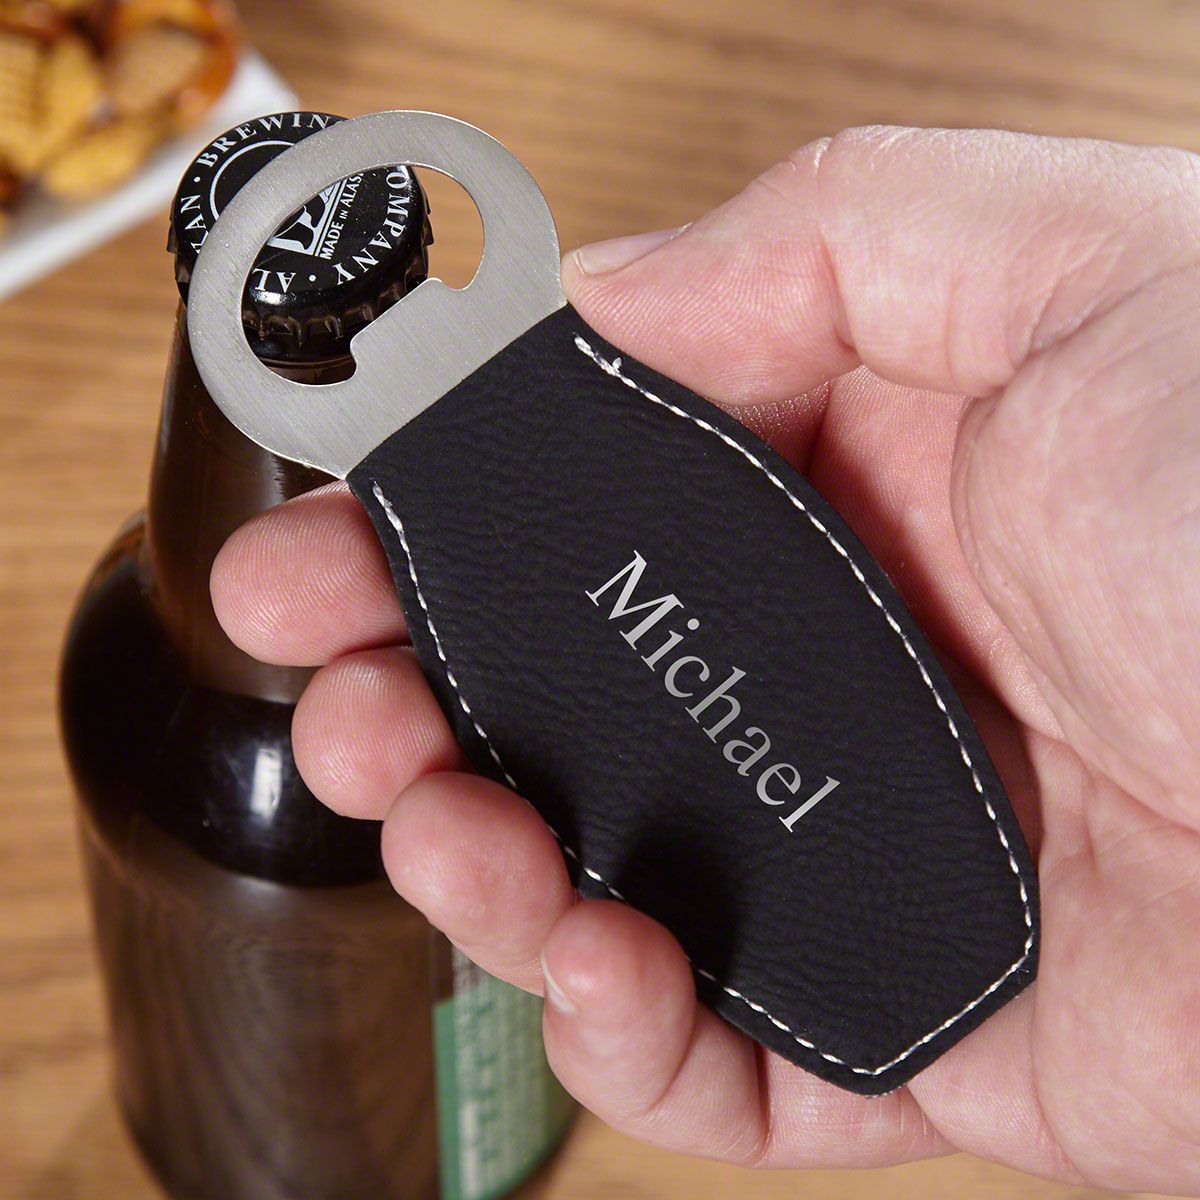 Black & Silver Engravable Beer Bottle Opener Personalized With Name In A Classy Style As A Great Gift For Men